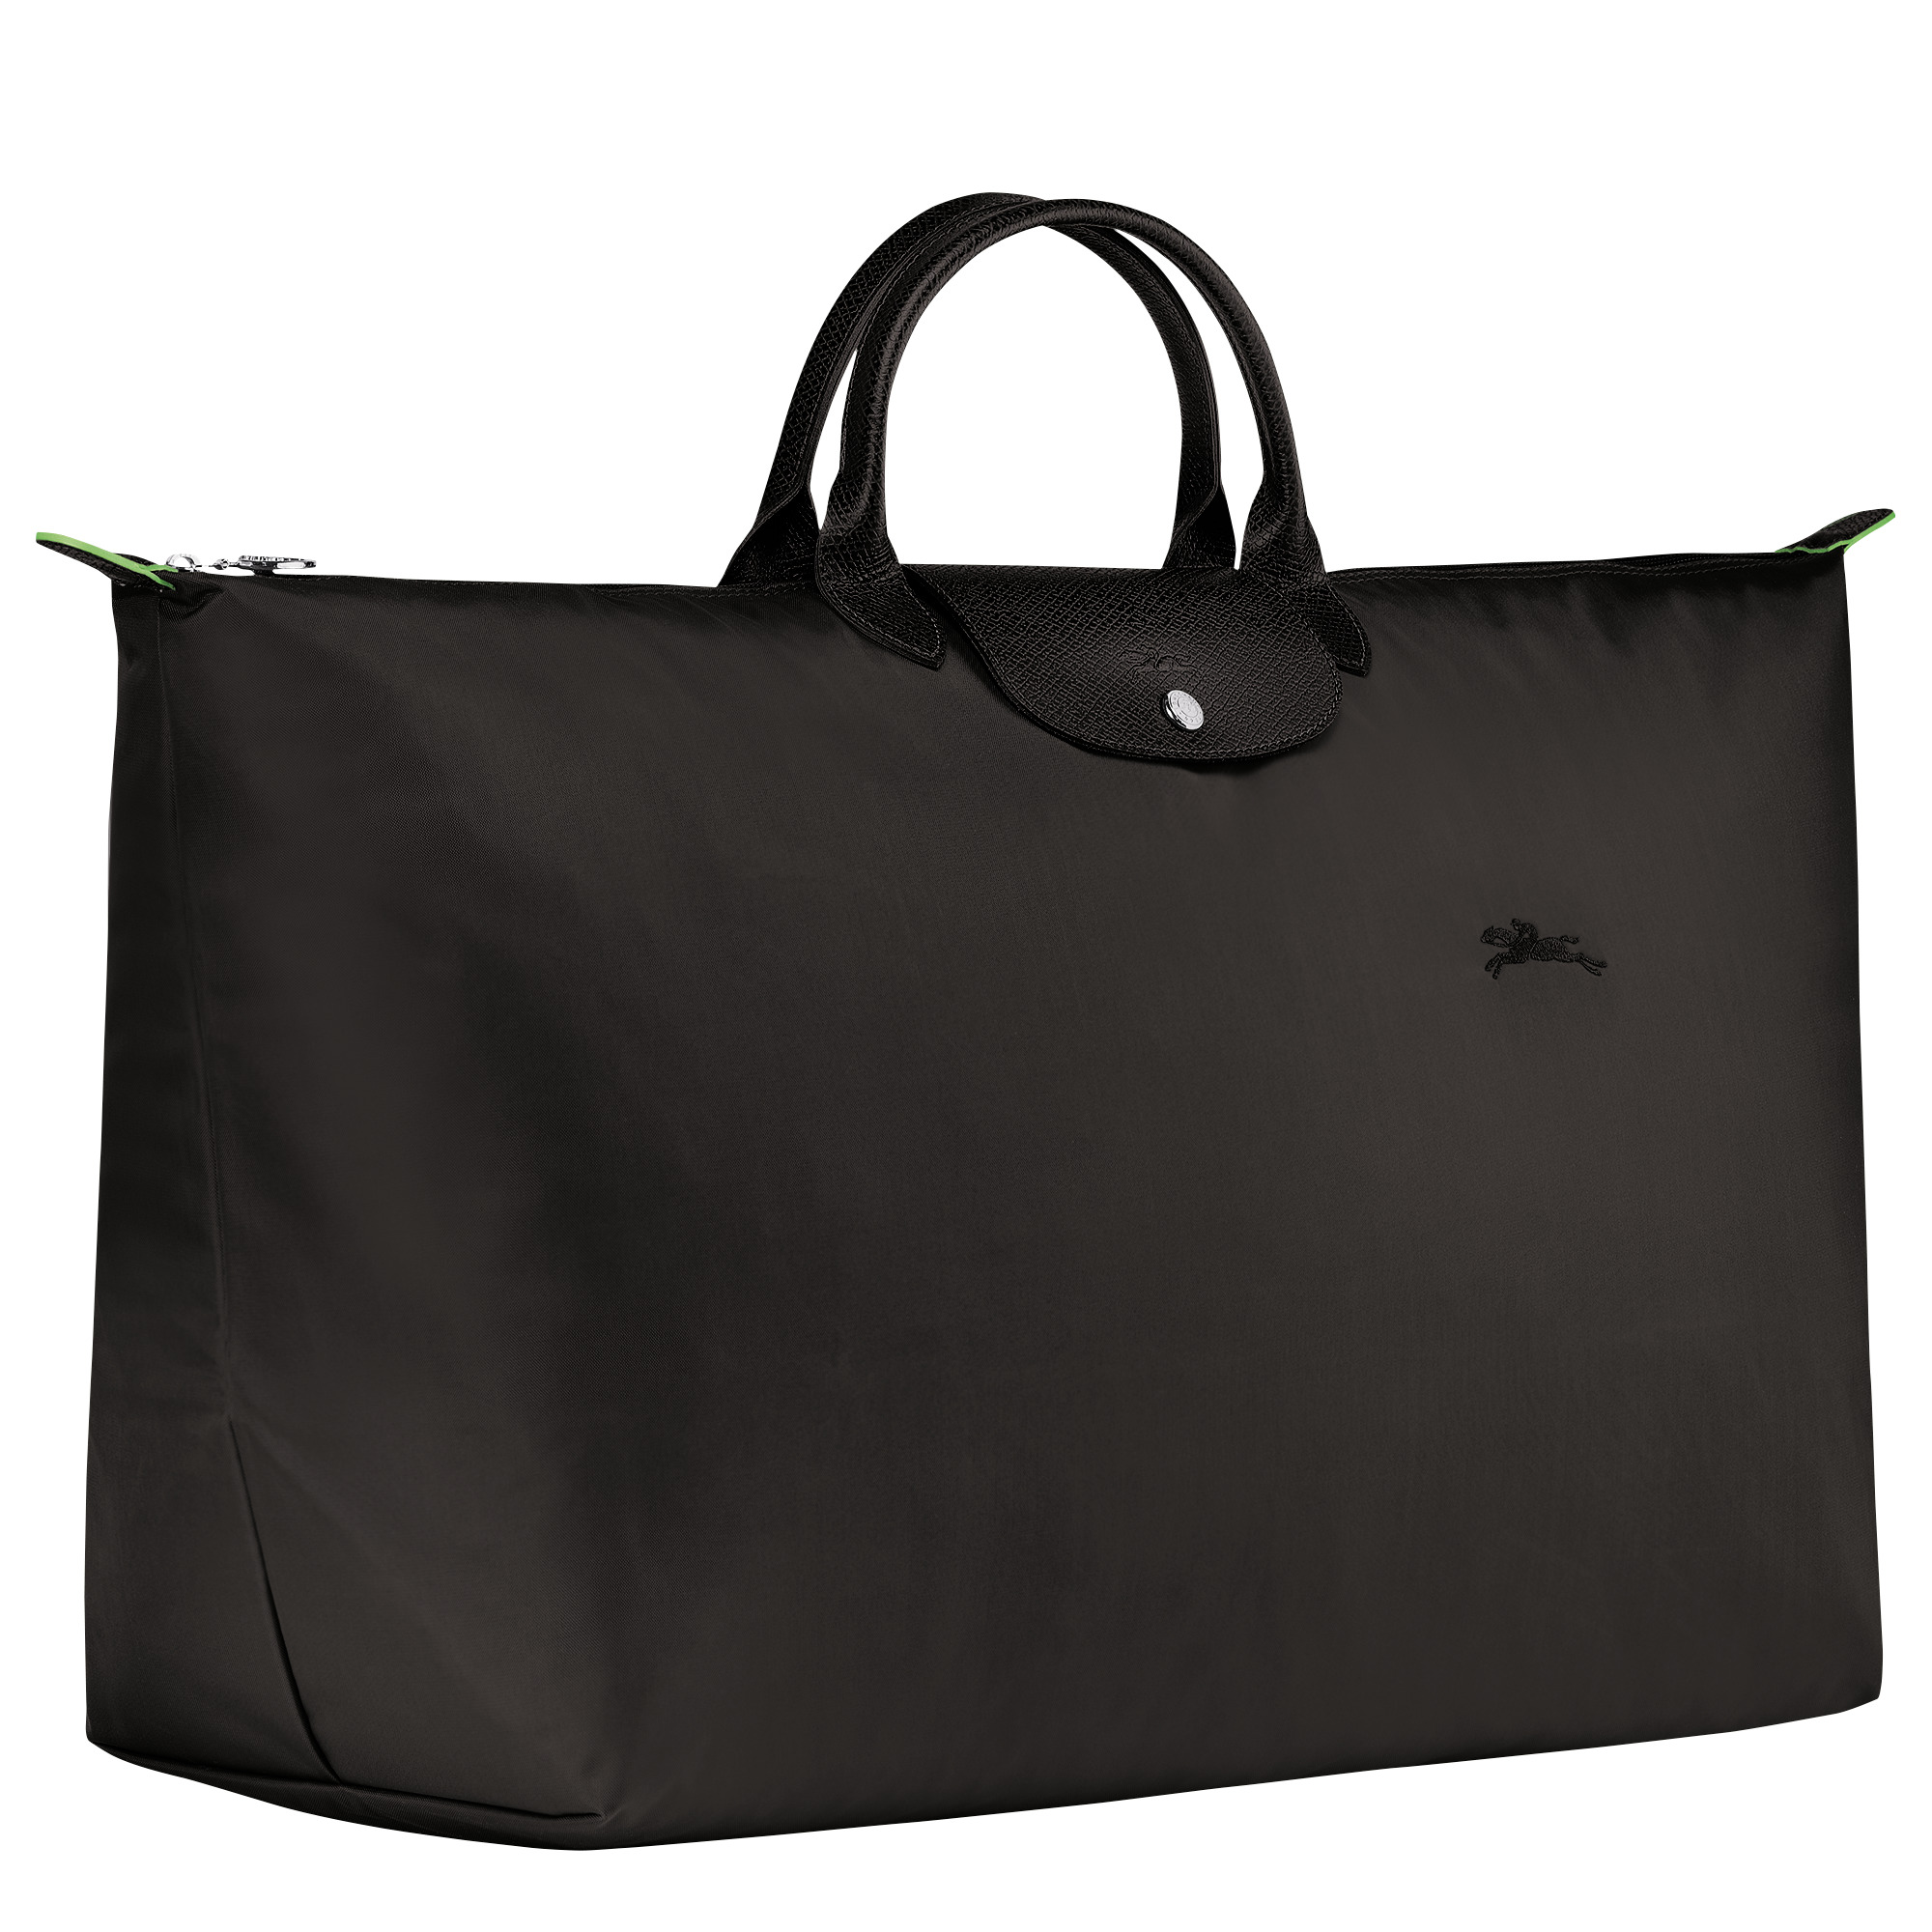 Le Pliage Green M Travel bag Black - Recycled canvas - 3